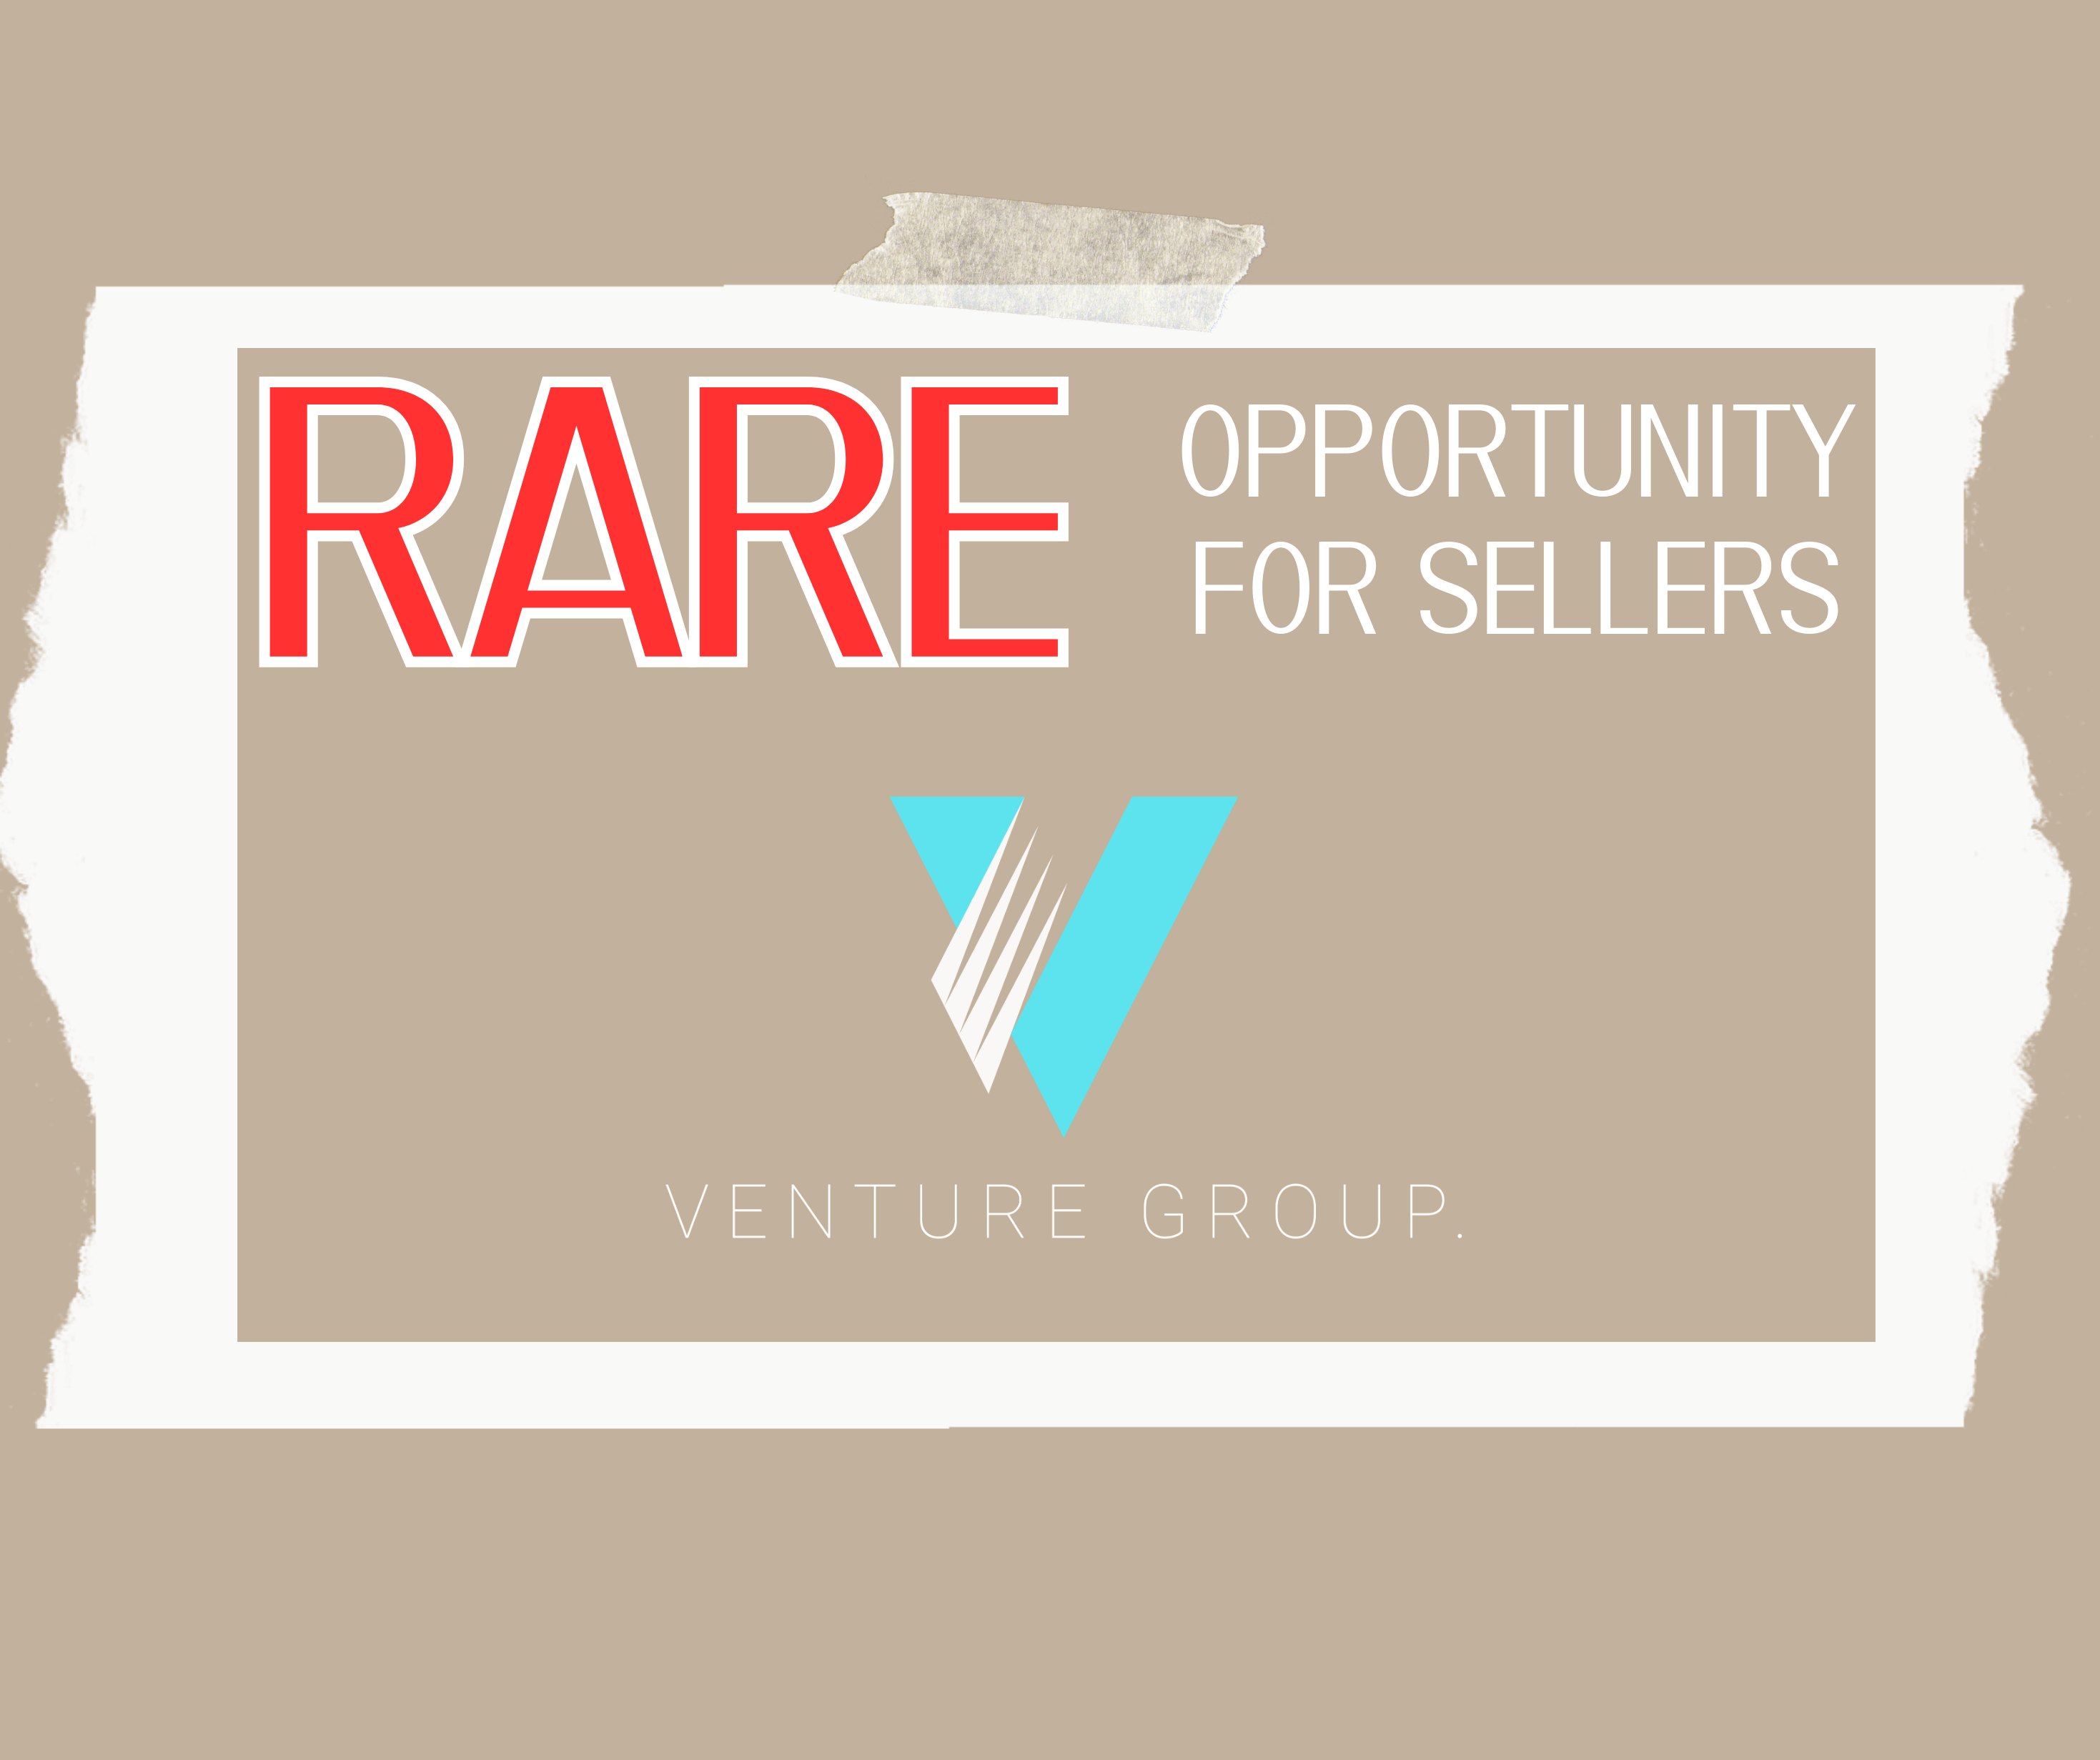 Rare Opportunity for Sellers